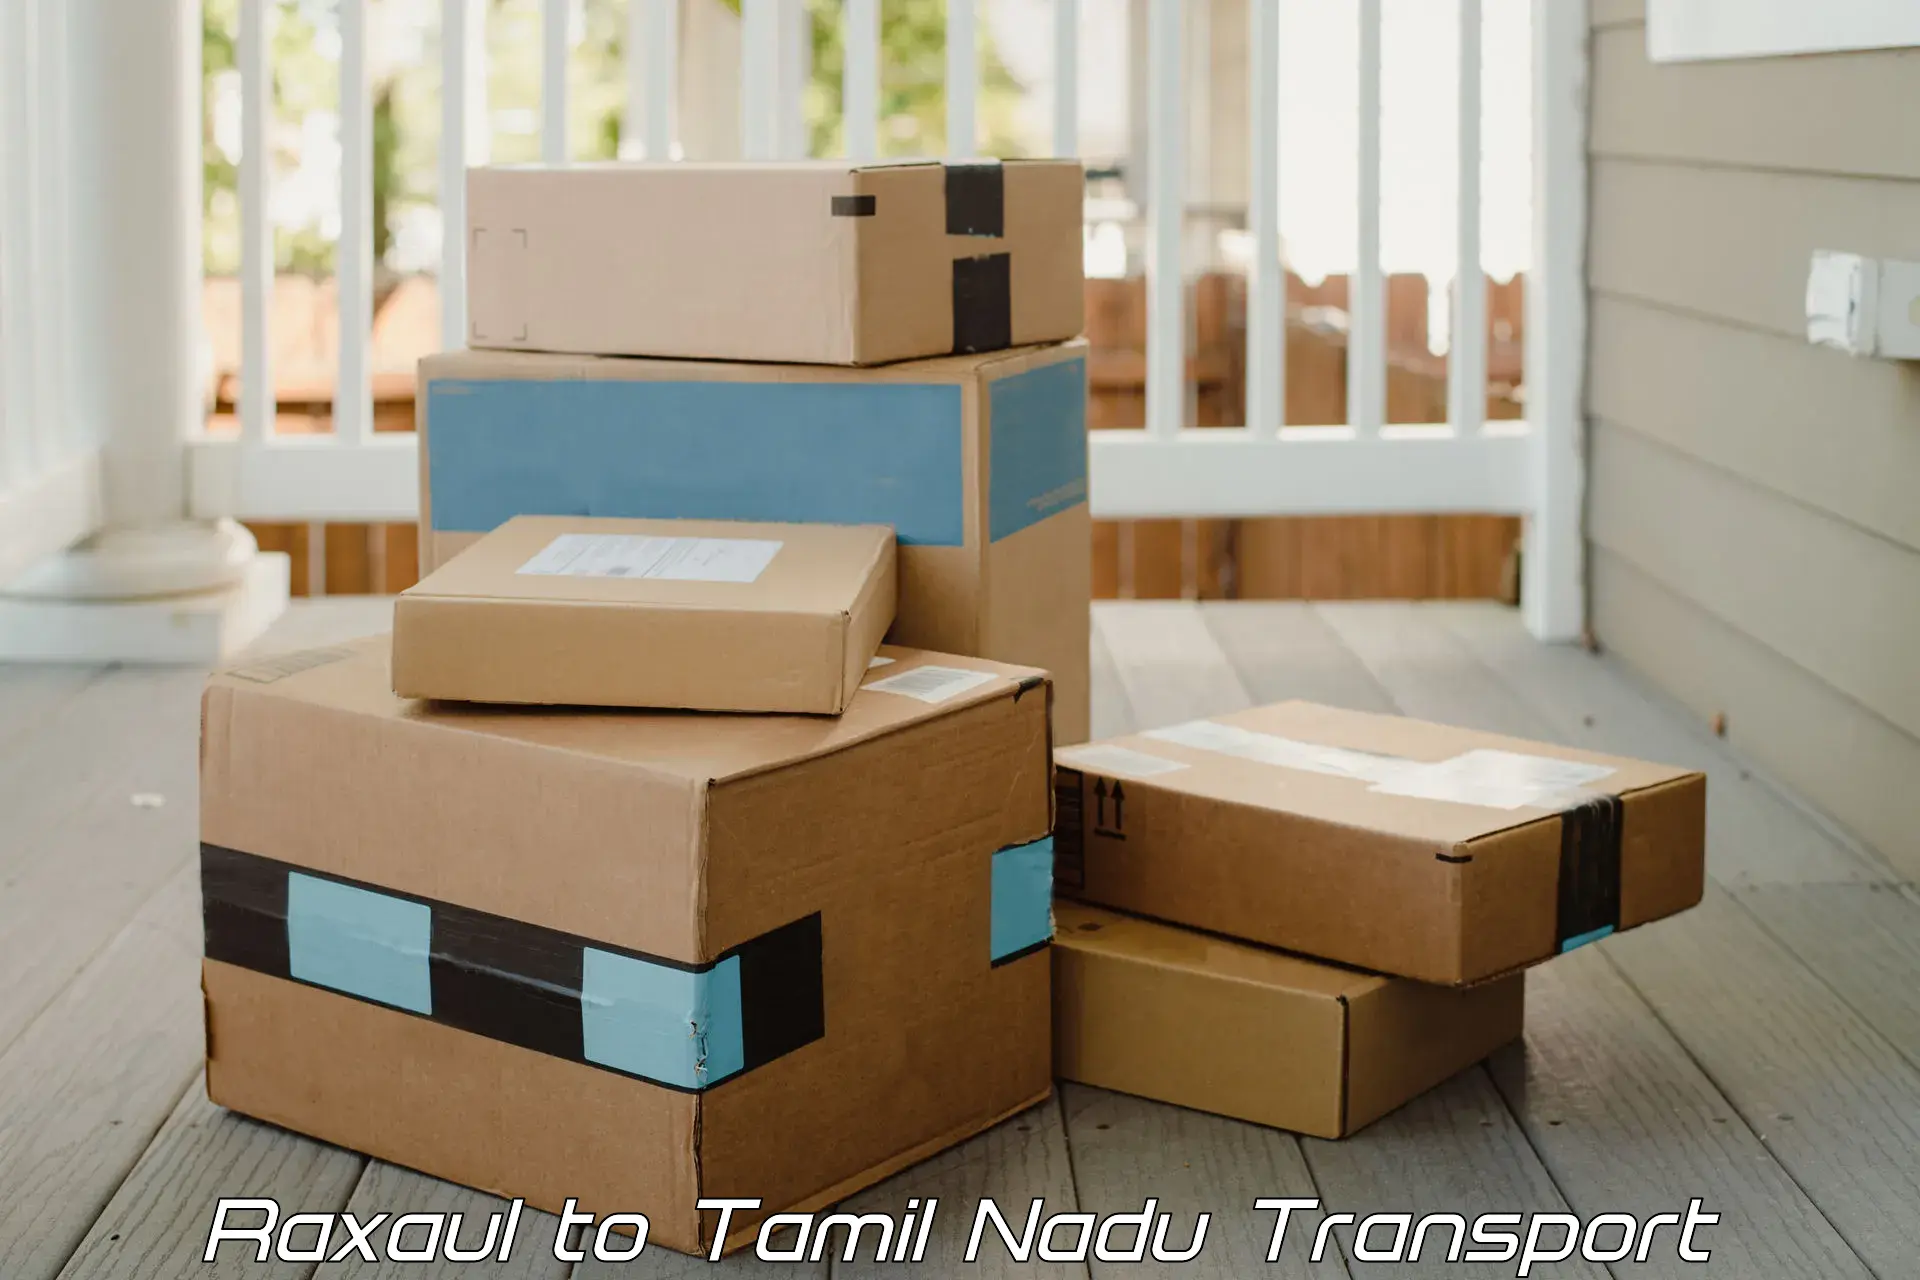 Container transport service Raxaul to Tamil Nadu